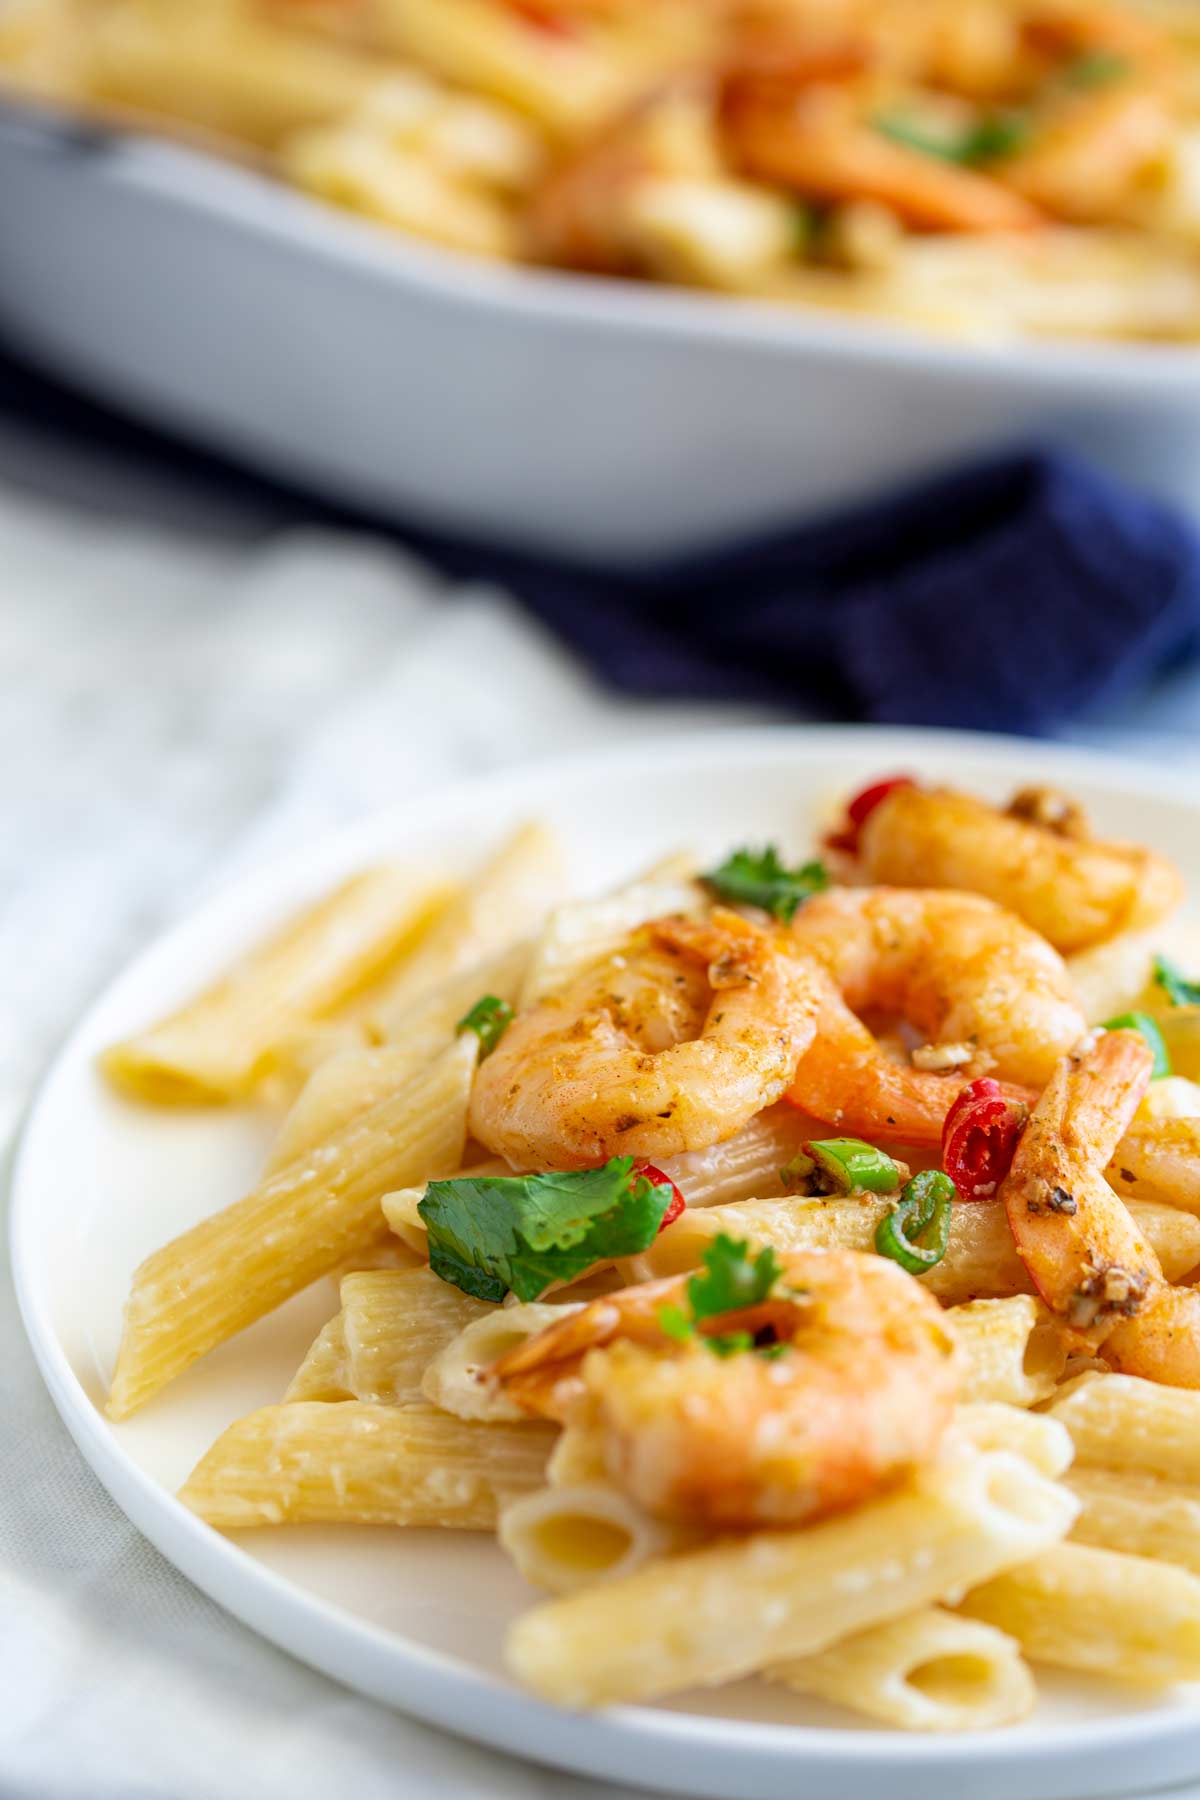 a plate of pasta with shrimp top with a full dish pasta in the background